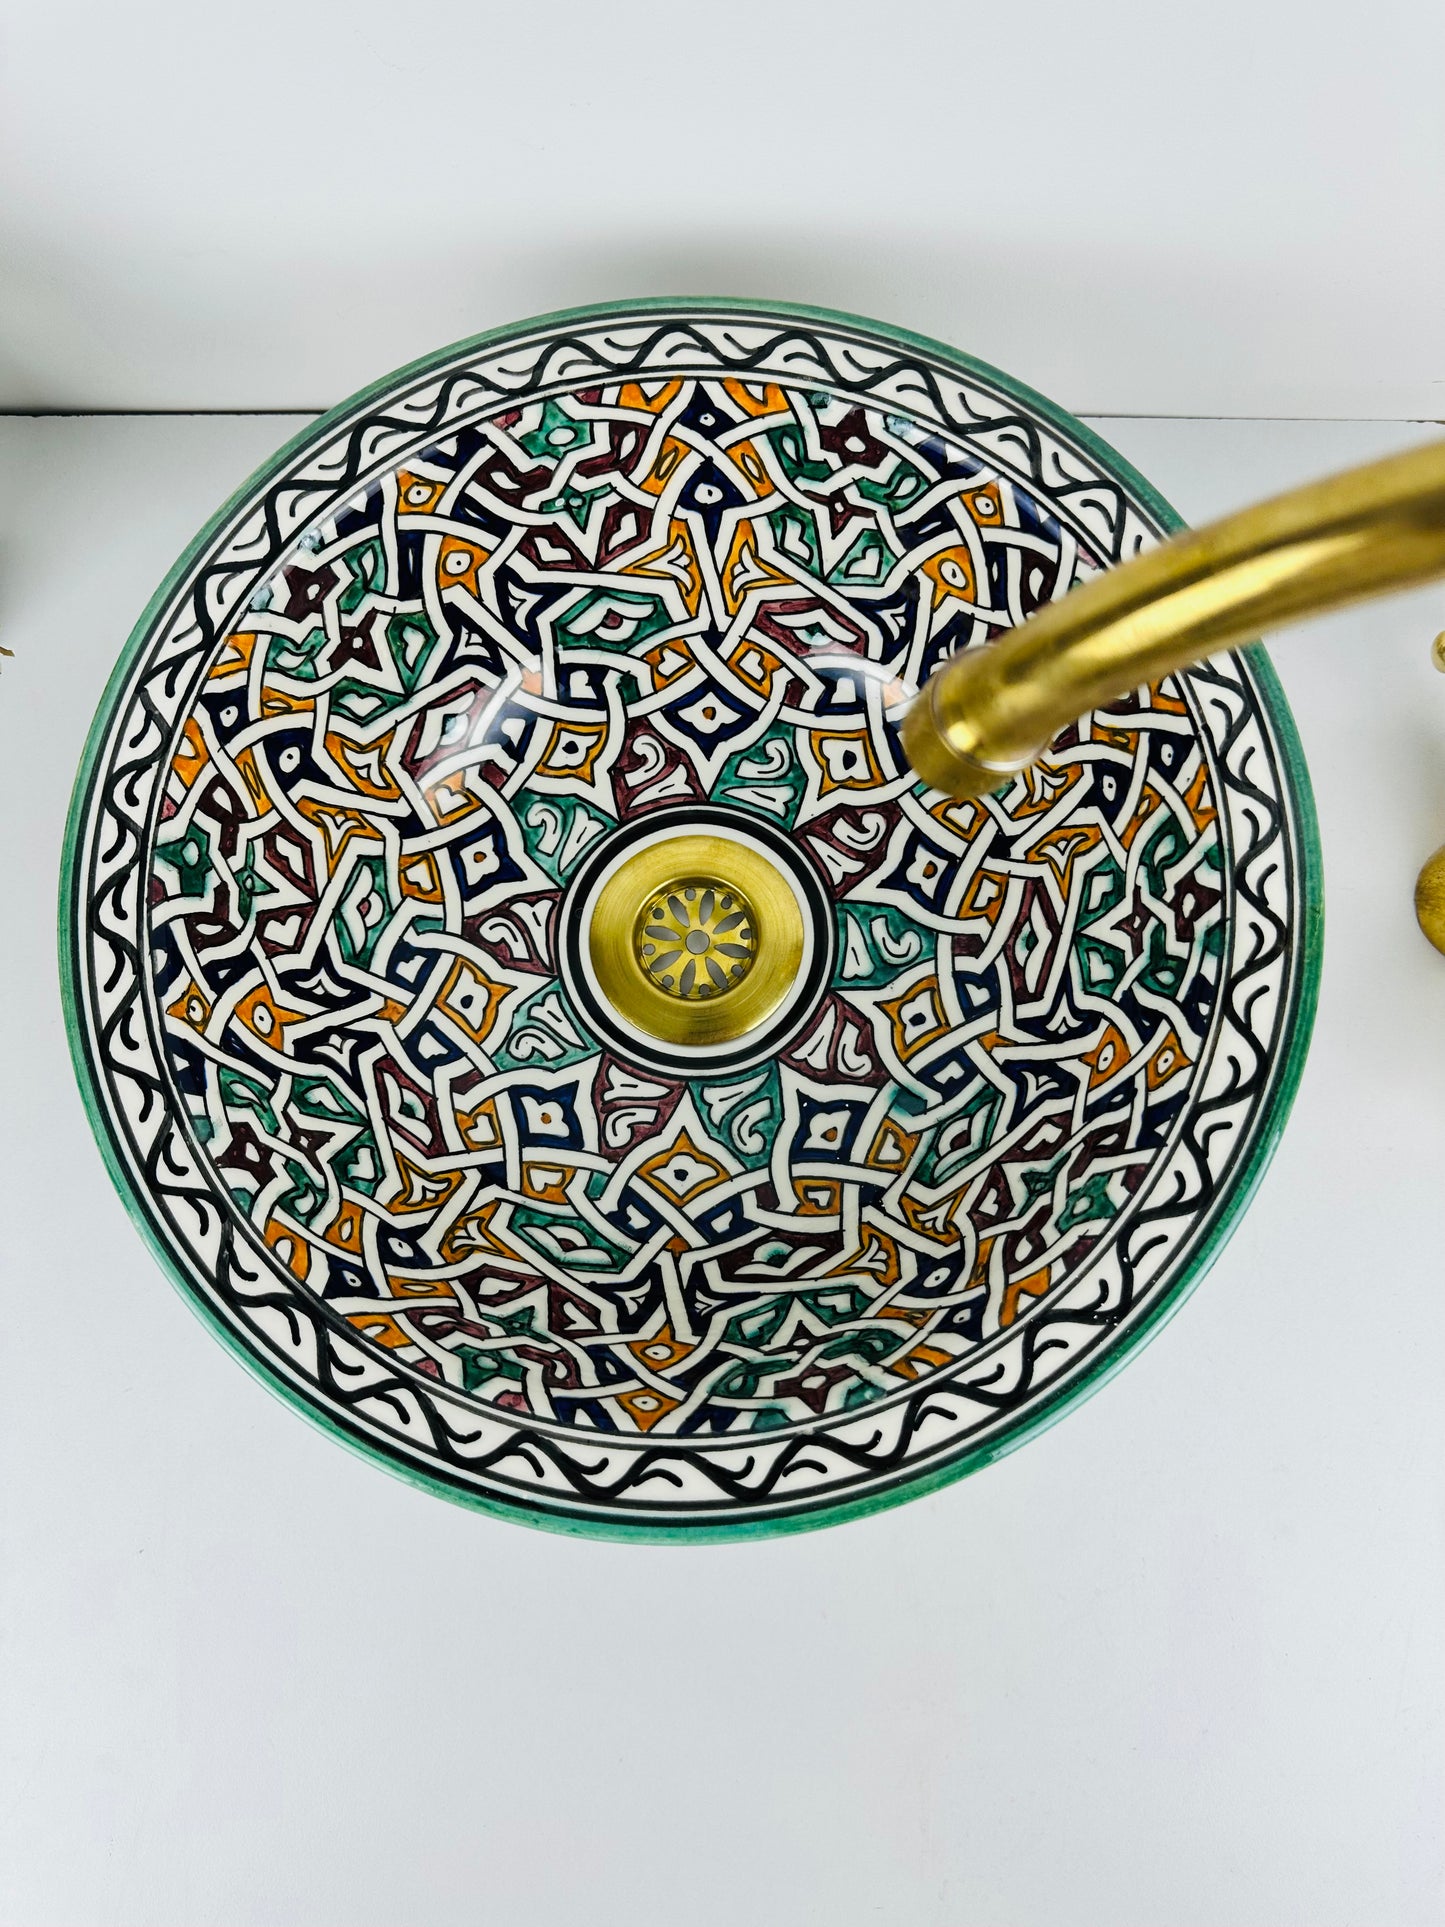 Nature's Palette: Handcrafted Ceramic Sink with Green and Multicolored Accents